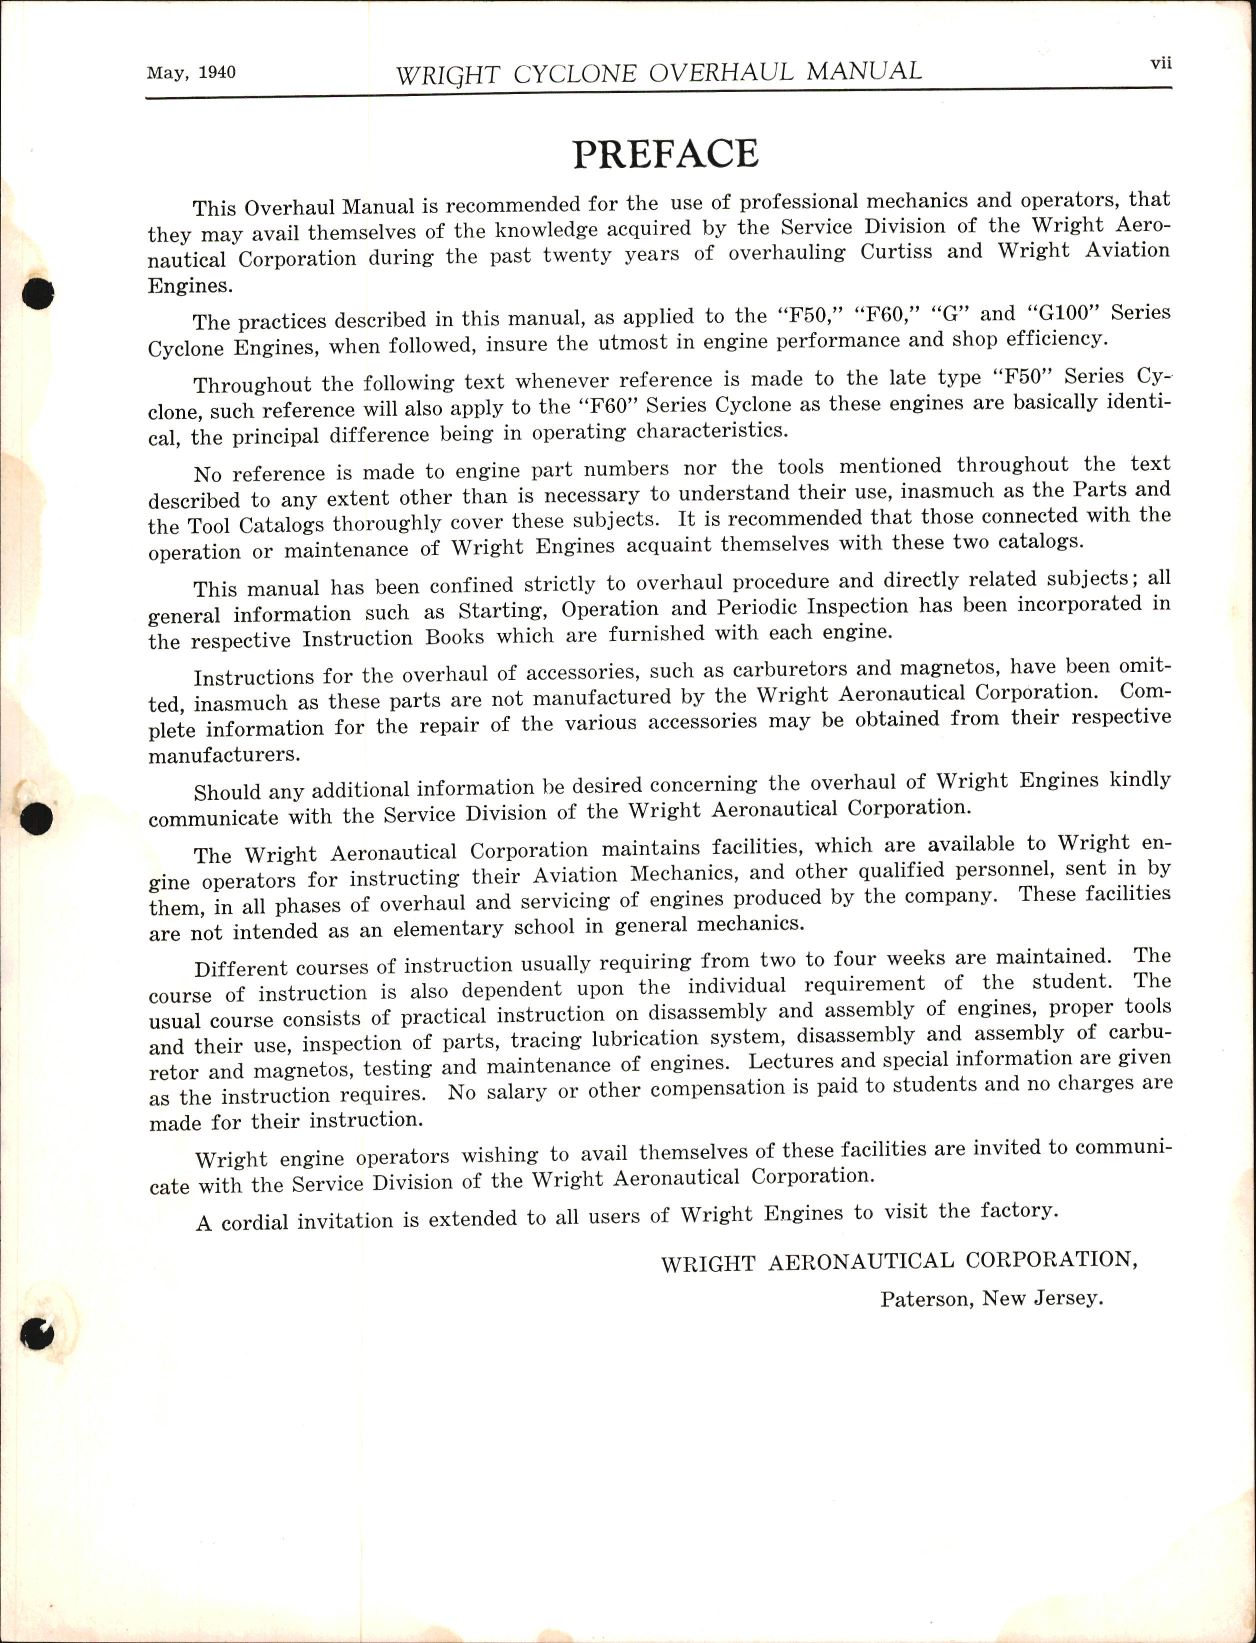 Sample page 7 from AirCorps Library document: Overhaul Manual for Wright Cyclone Engines - Direct and Geared Drives